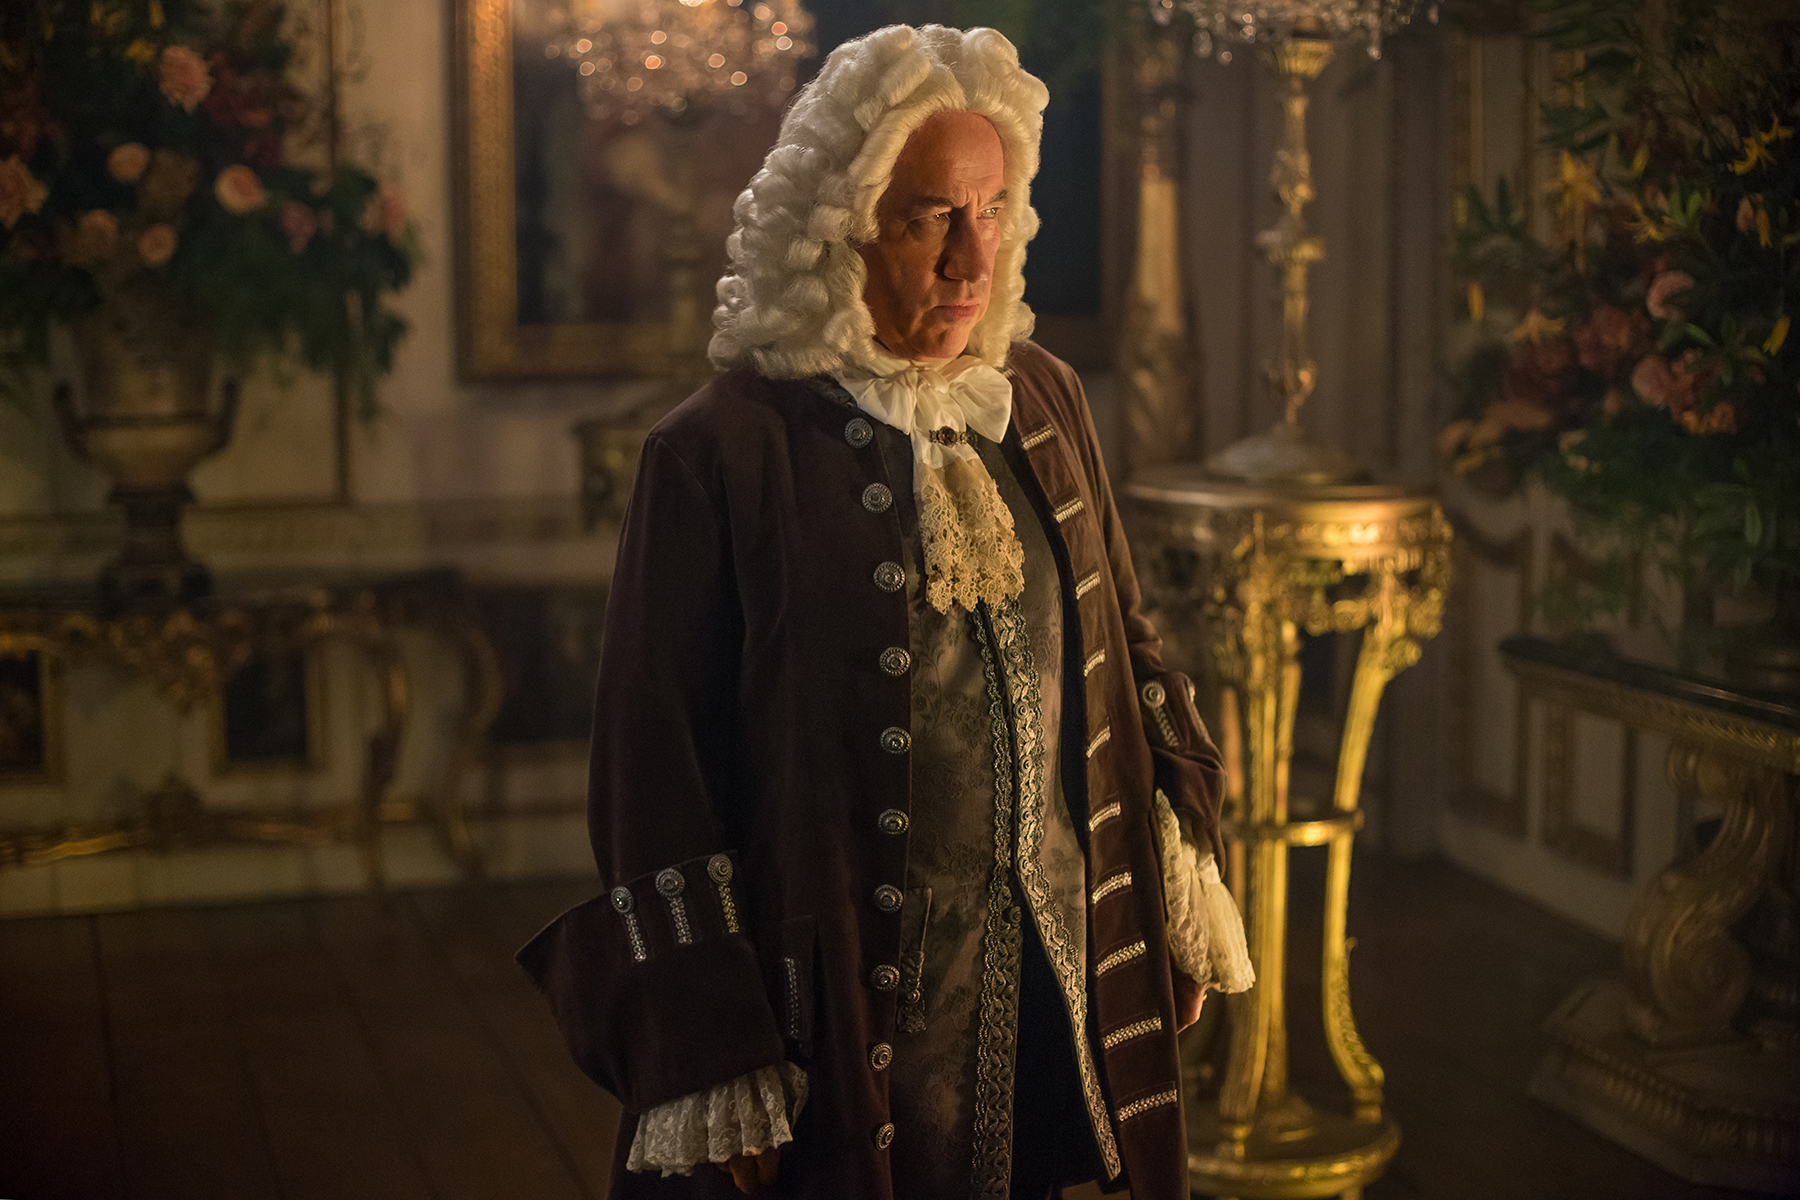 The Duke of Sandringham (Simon Callow). Who will hopefully get punched at least once in this season.